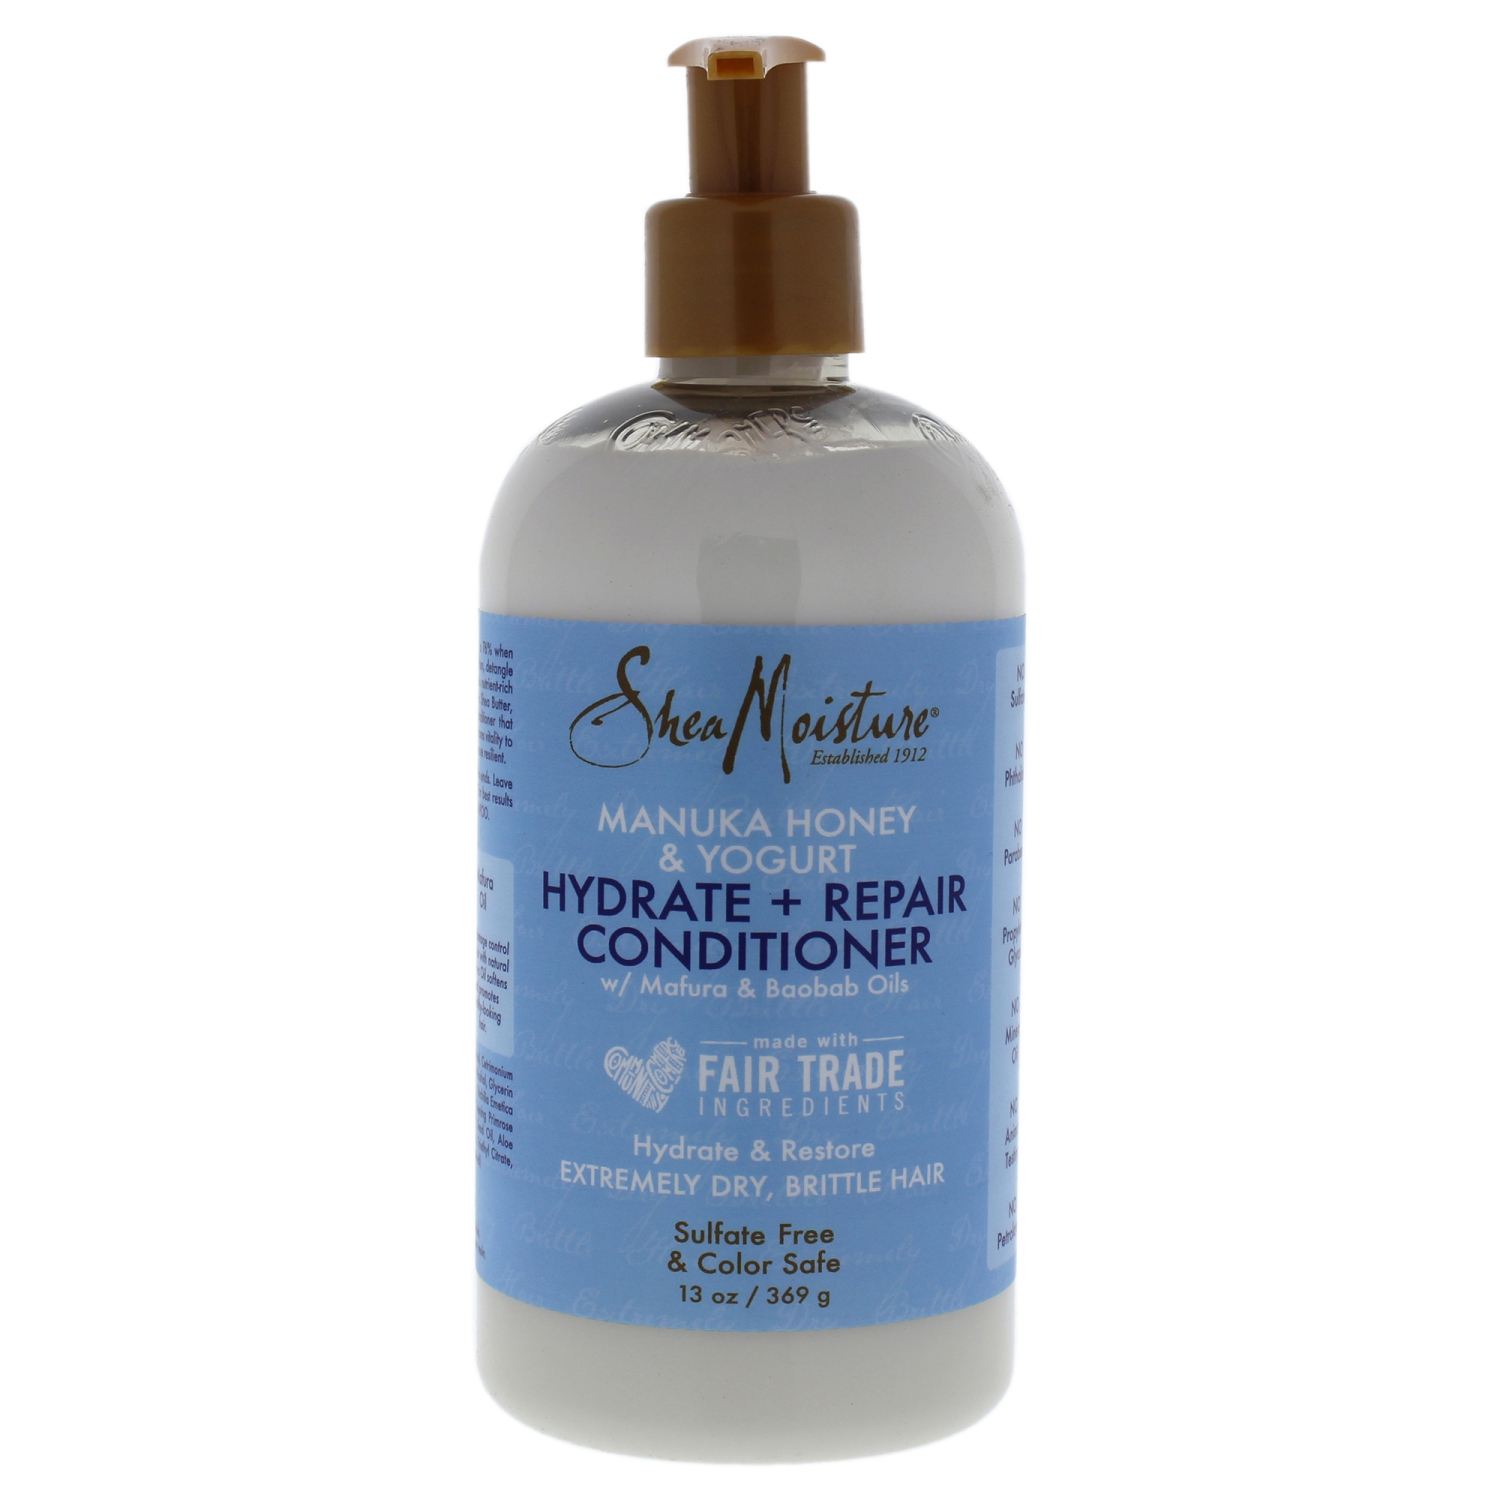 Manuka Honey and Yogurt Hydrate Plus Repair Conditioner by Shea Moisture for Unisex - 13 oz Conditioner